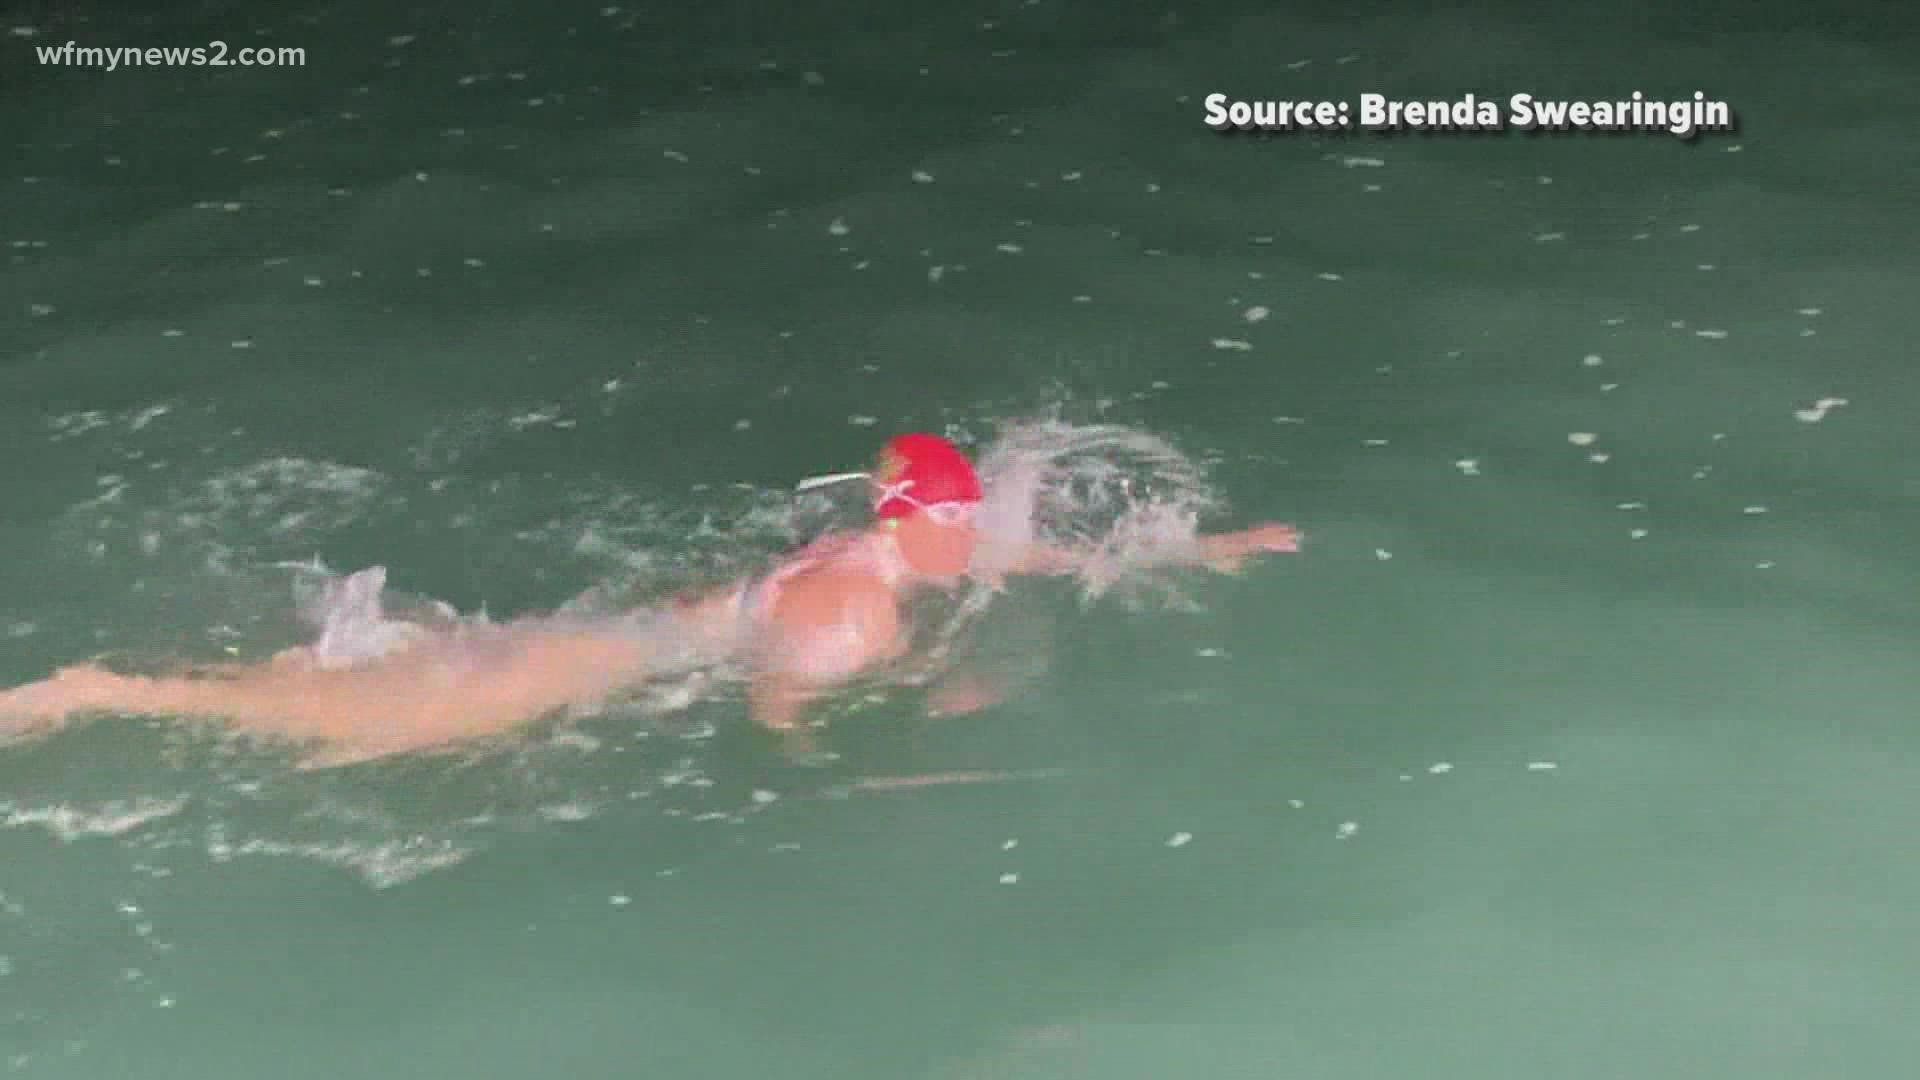 The 51-year-old made the 21 mile swim in just over 13 hours.